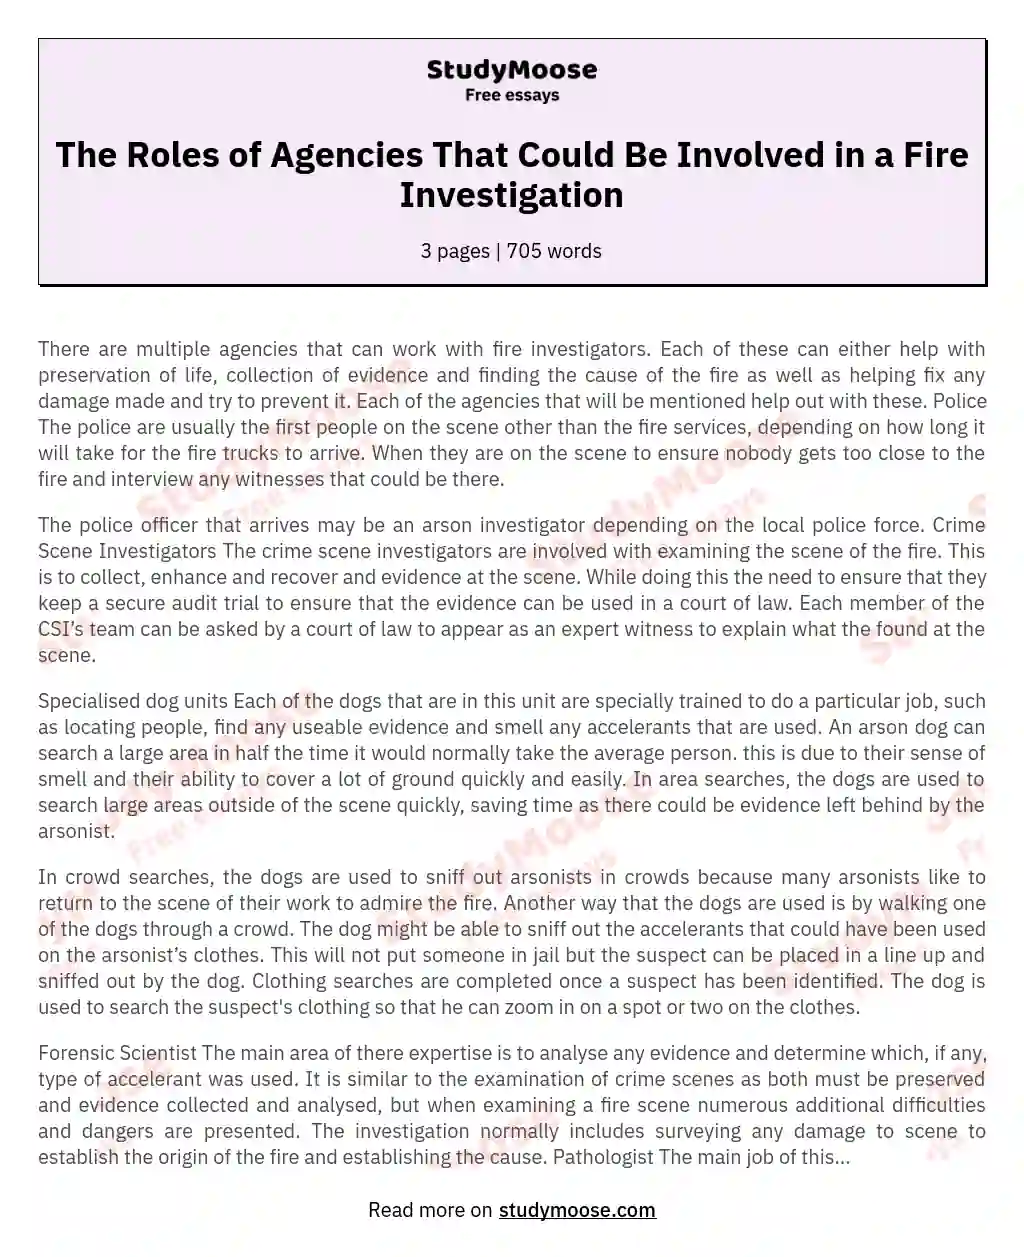 The Roles of Agencies That Could Be Involved in a Fire Investigation essay